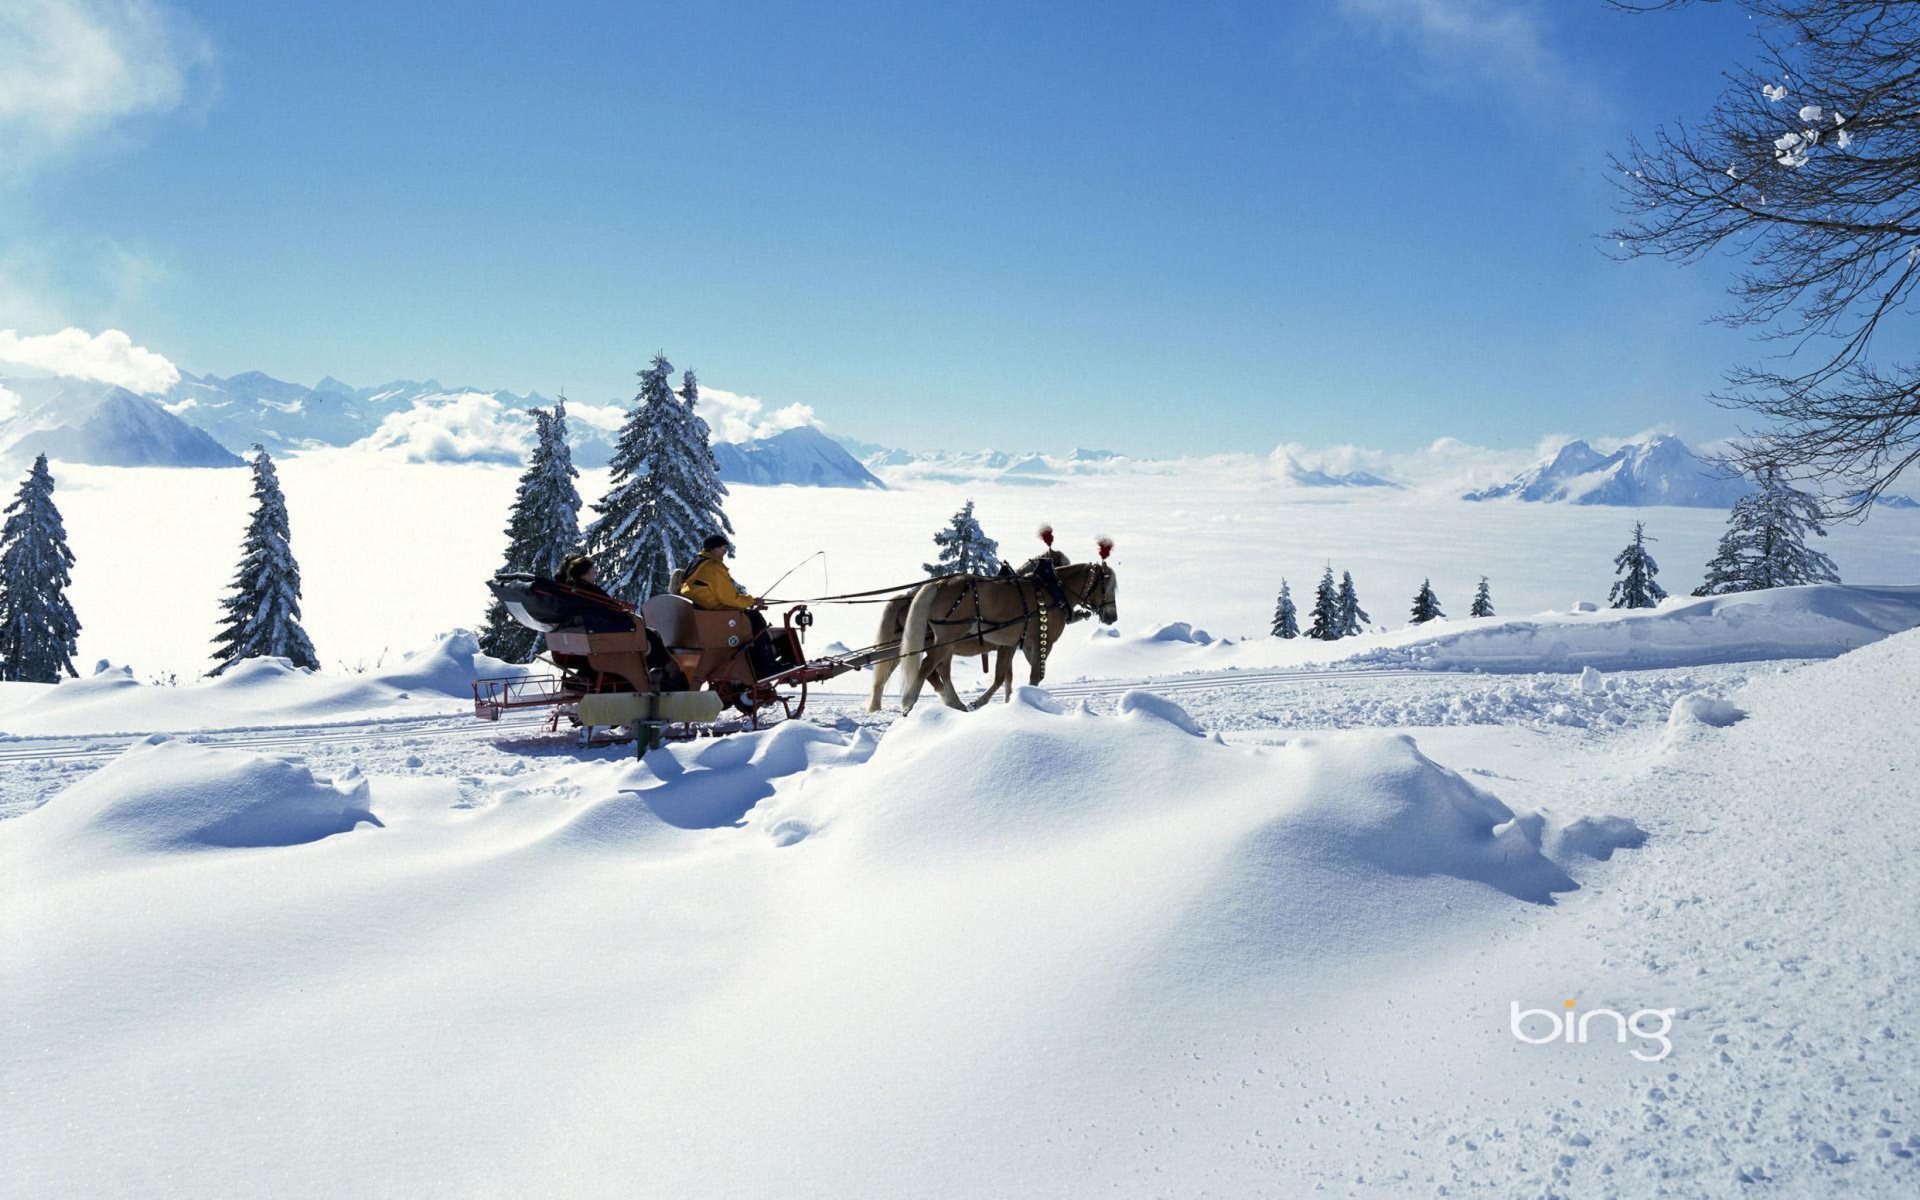 Winter Snow And Sleigh With Horses screenshot #1 1920x1200